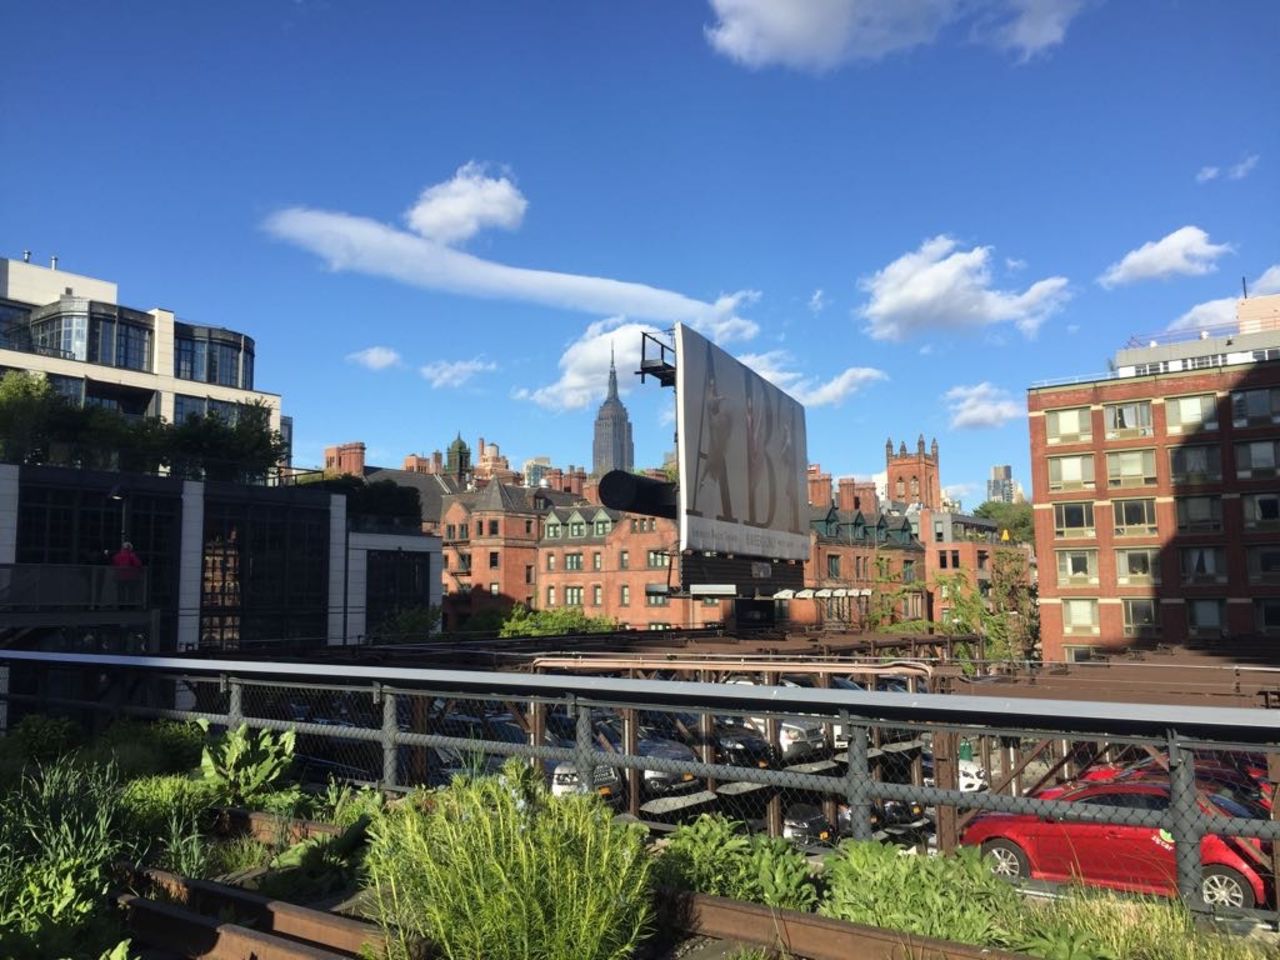 The view from the High Line in Manhattan, New York.